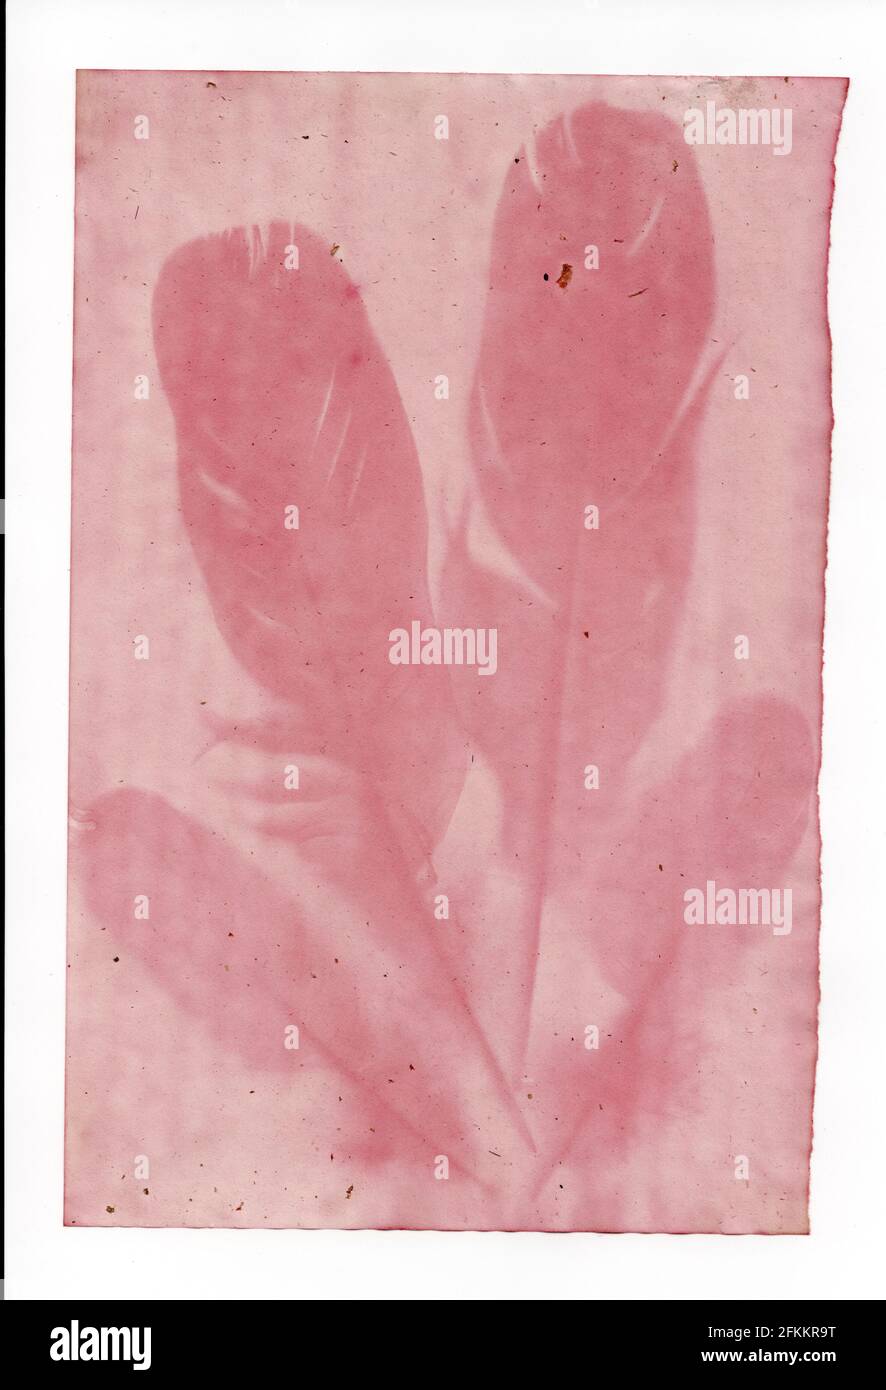 Beetroot juice anthotype sun print with feathers design Stock Photo